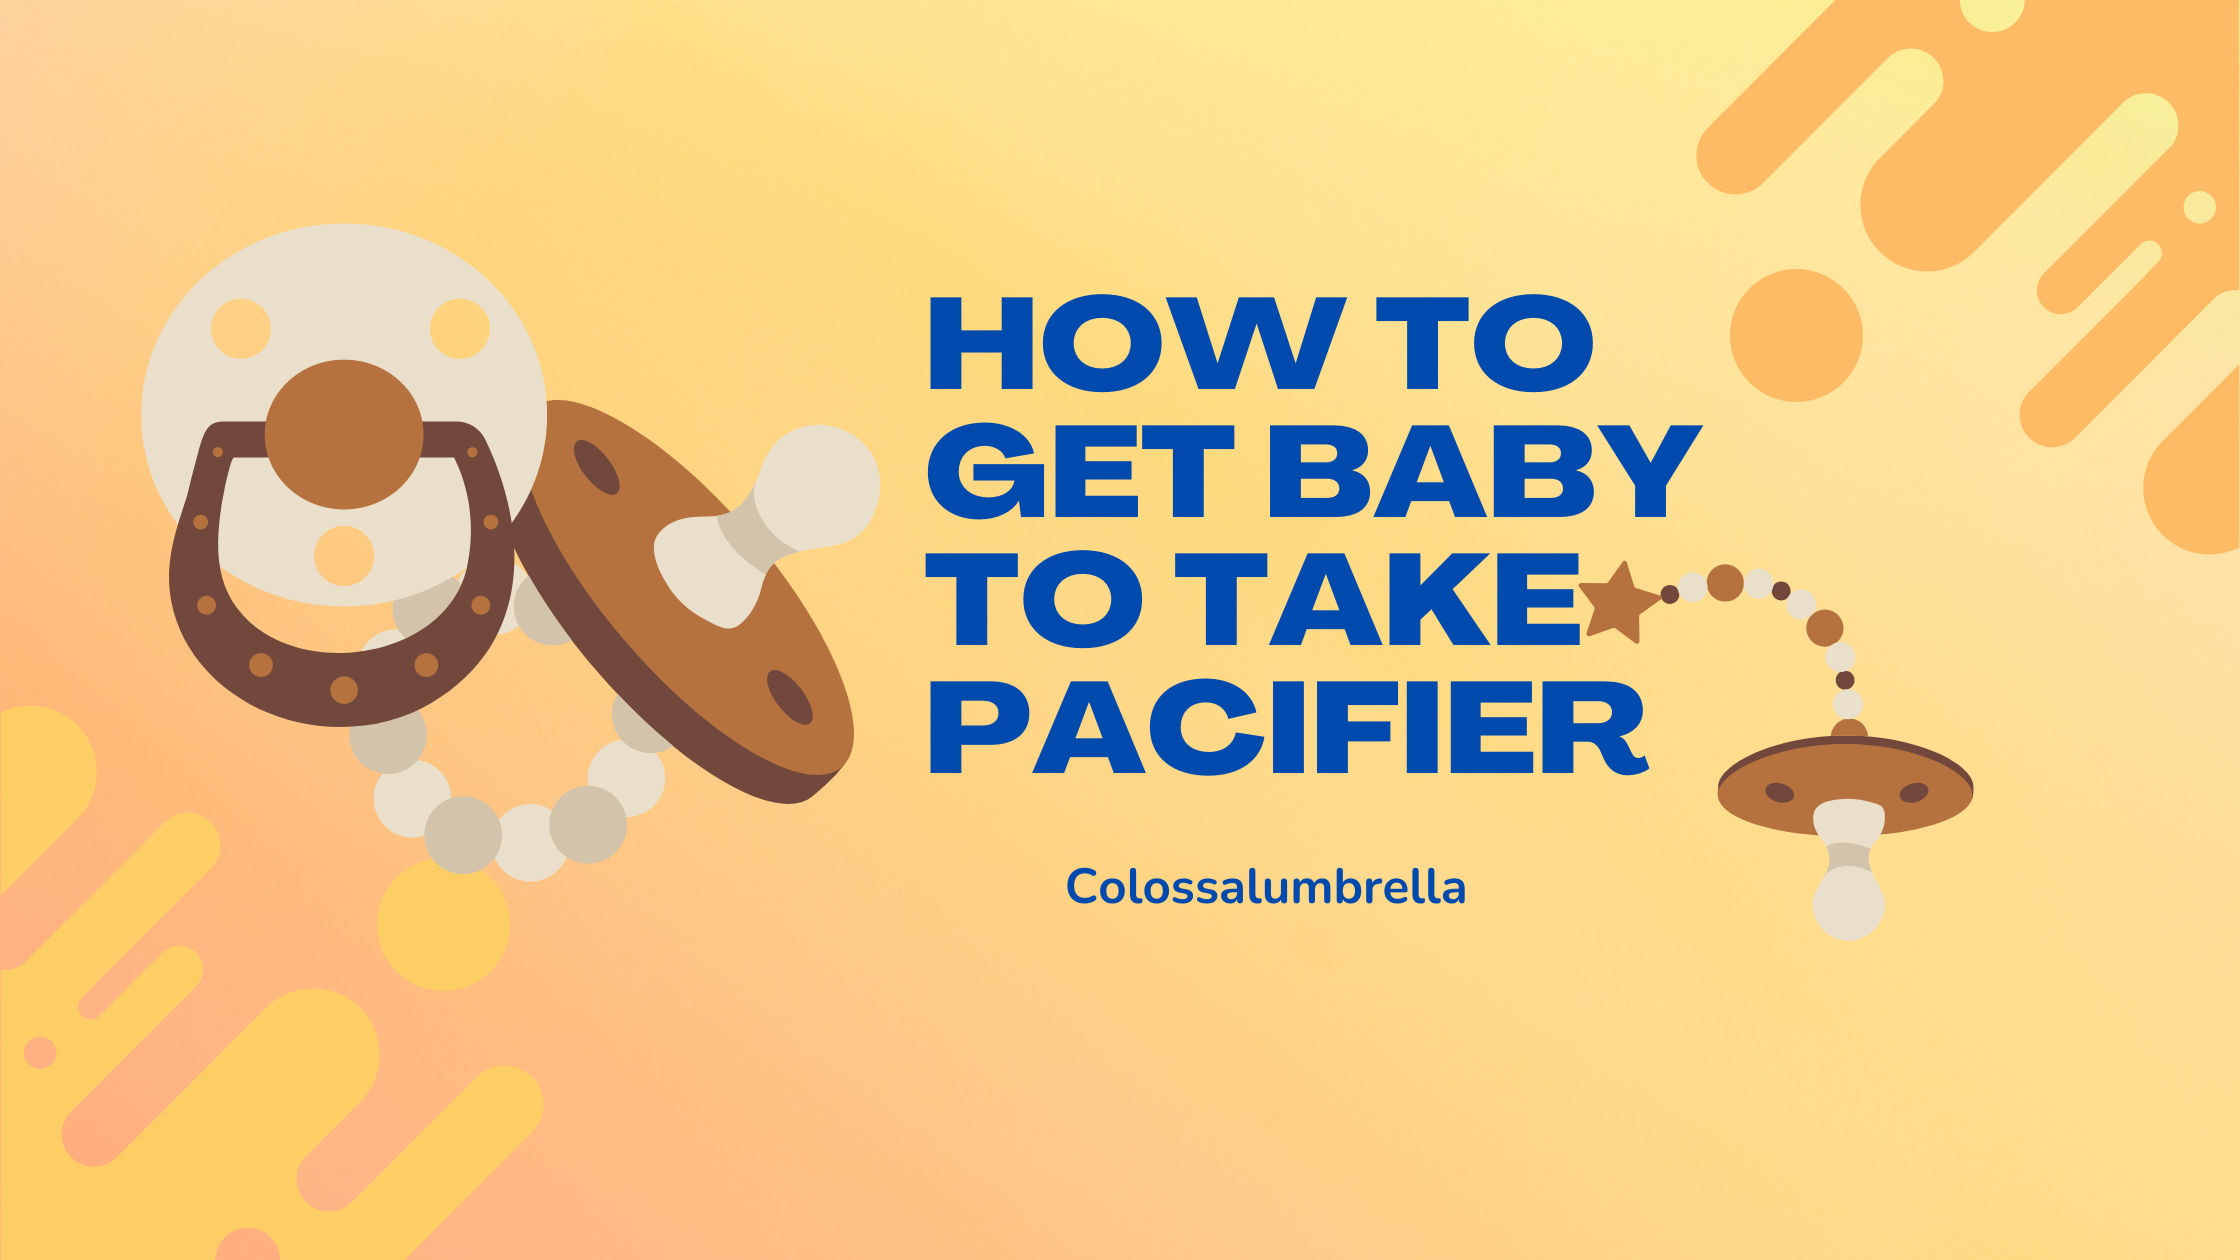 How to get baby to take pacifier